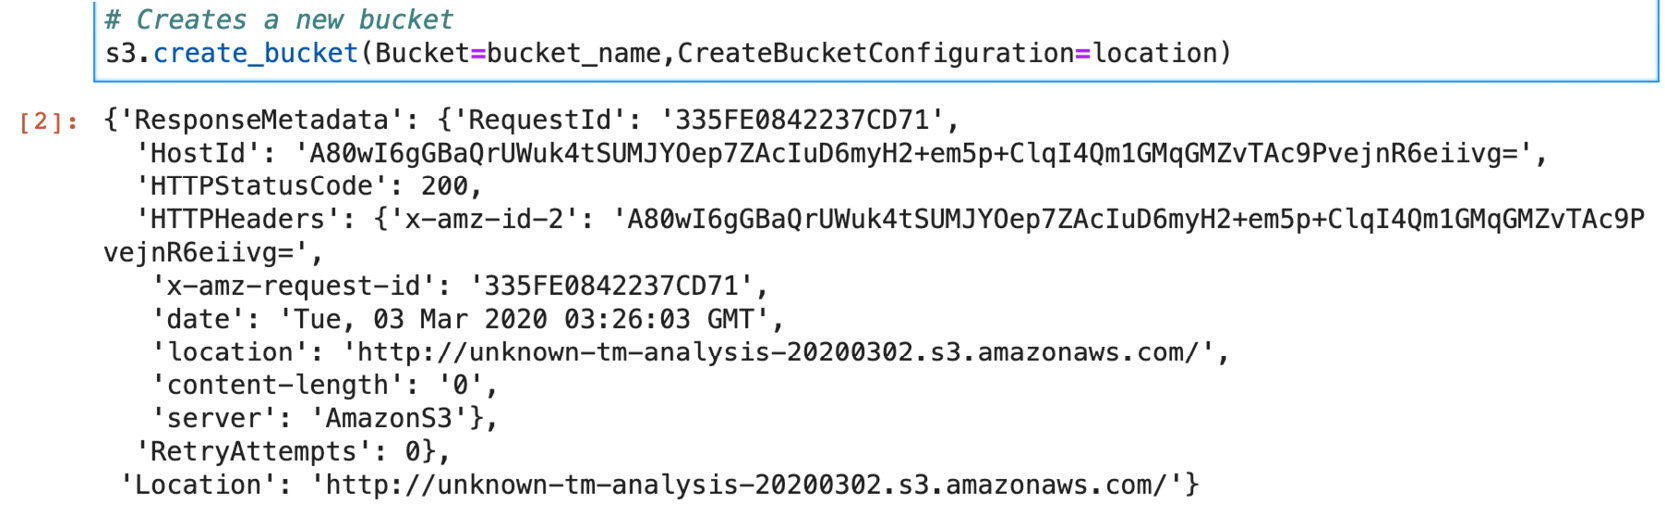 Figure 3.78: Output from the S3 Create bucket call
